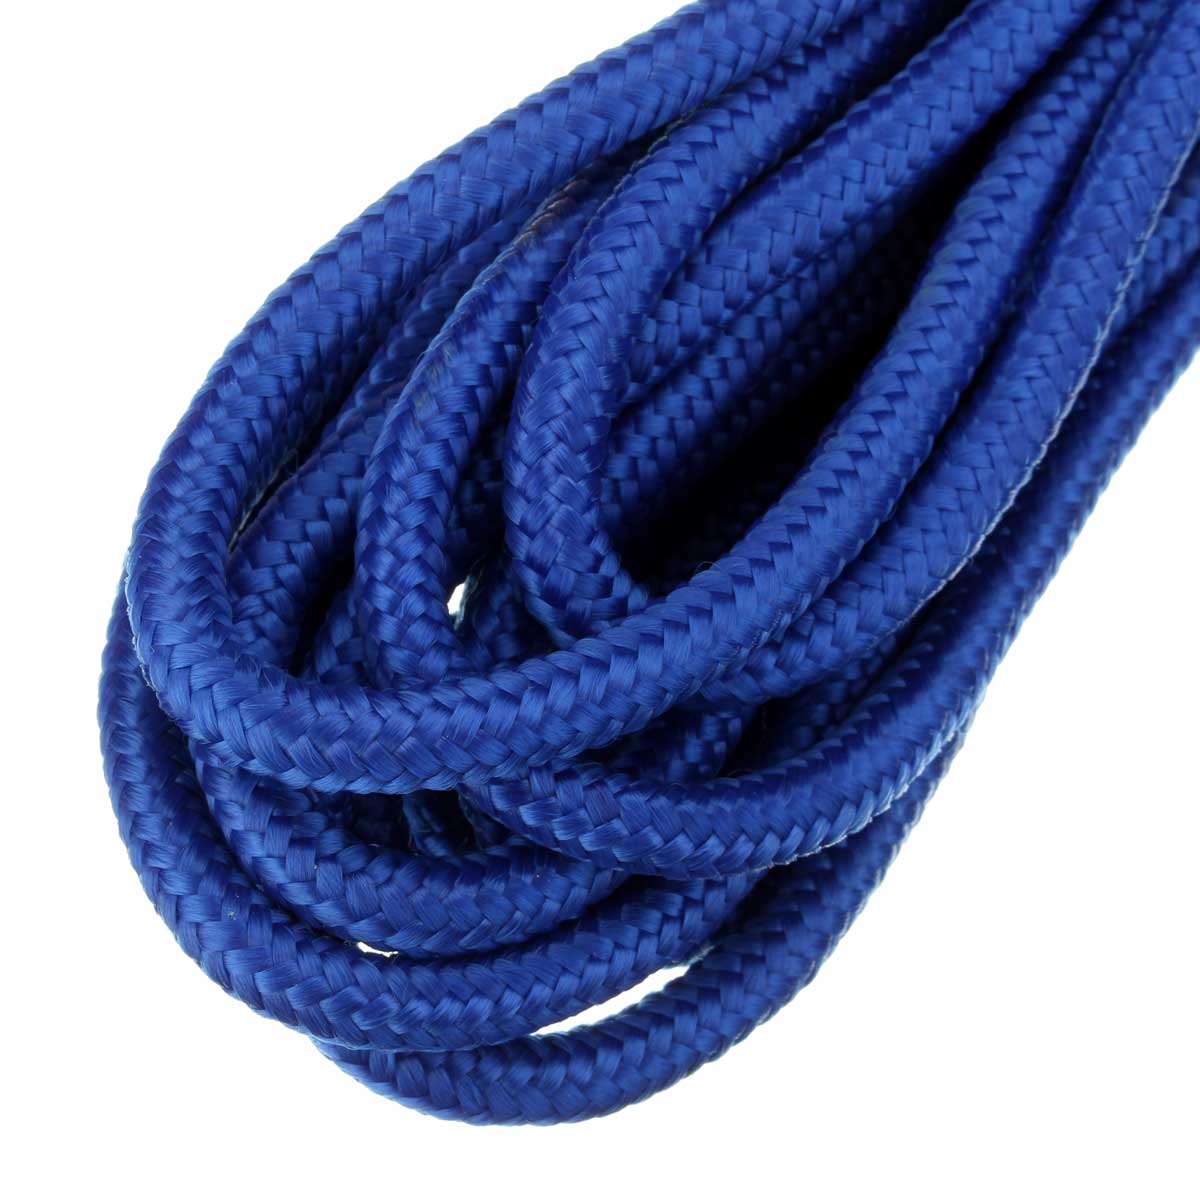 10M-328FT-Lifeline-Climbing-Rope-Paracord-Outdoor-Escape-Survival-Rope-String-Cord-1050559